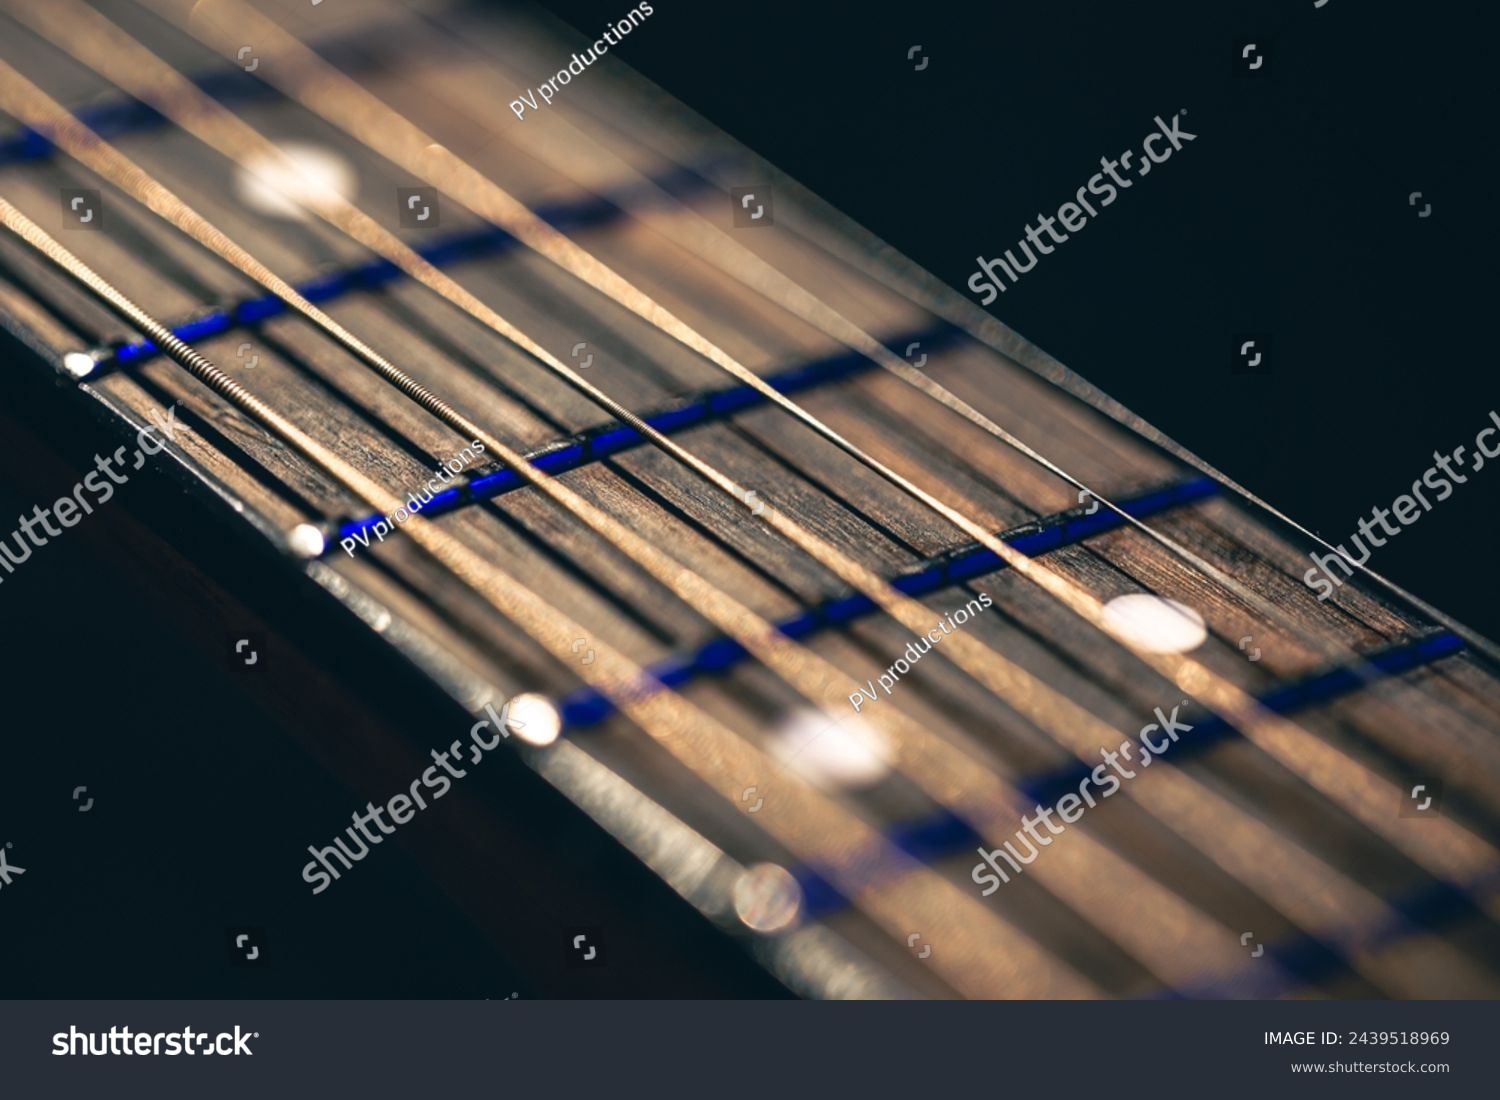 Part of an acoustic guitar, guitar fretboard on a black background. #2439518969